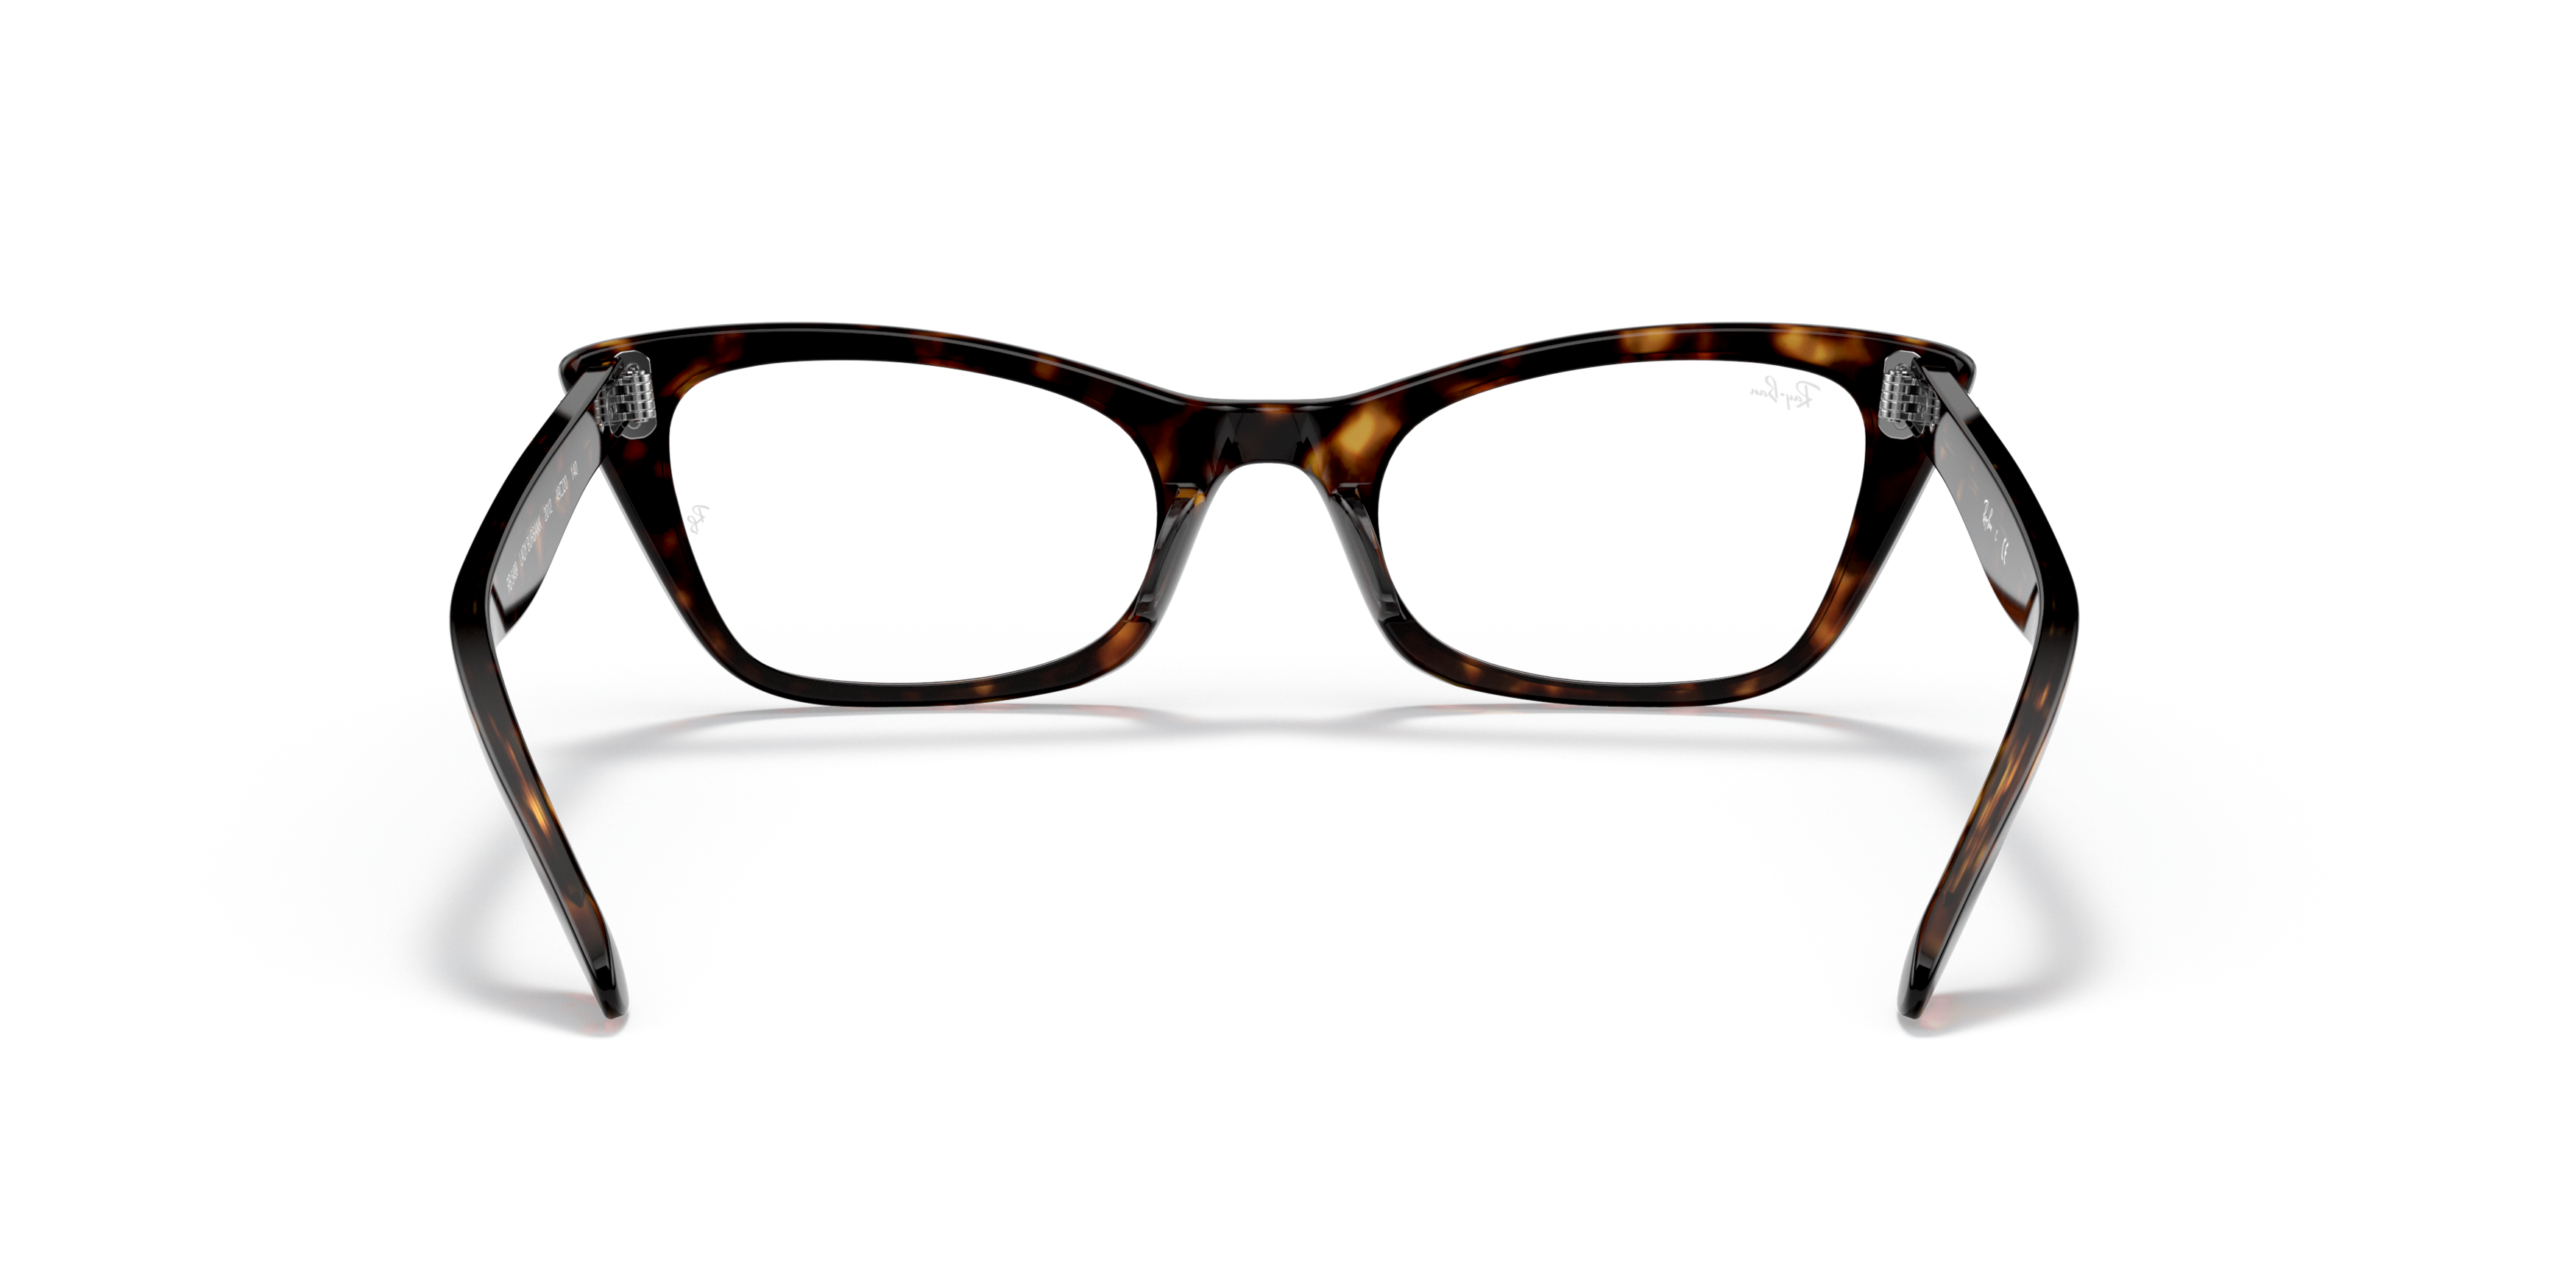 Detail02 Ray-Ban Lady RX 5499 Glasses Transparent / Tortoise Shell